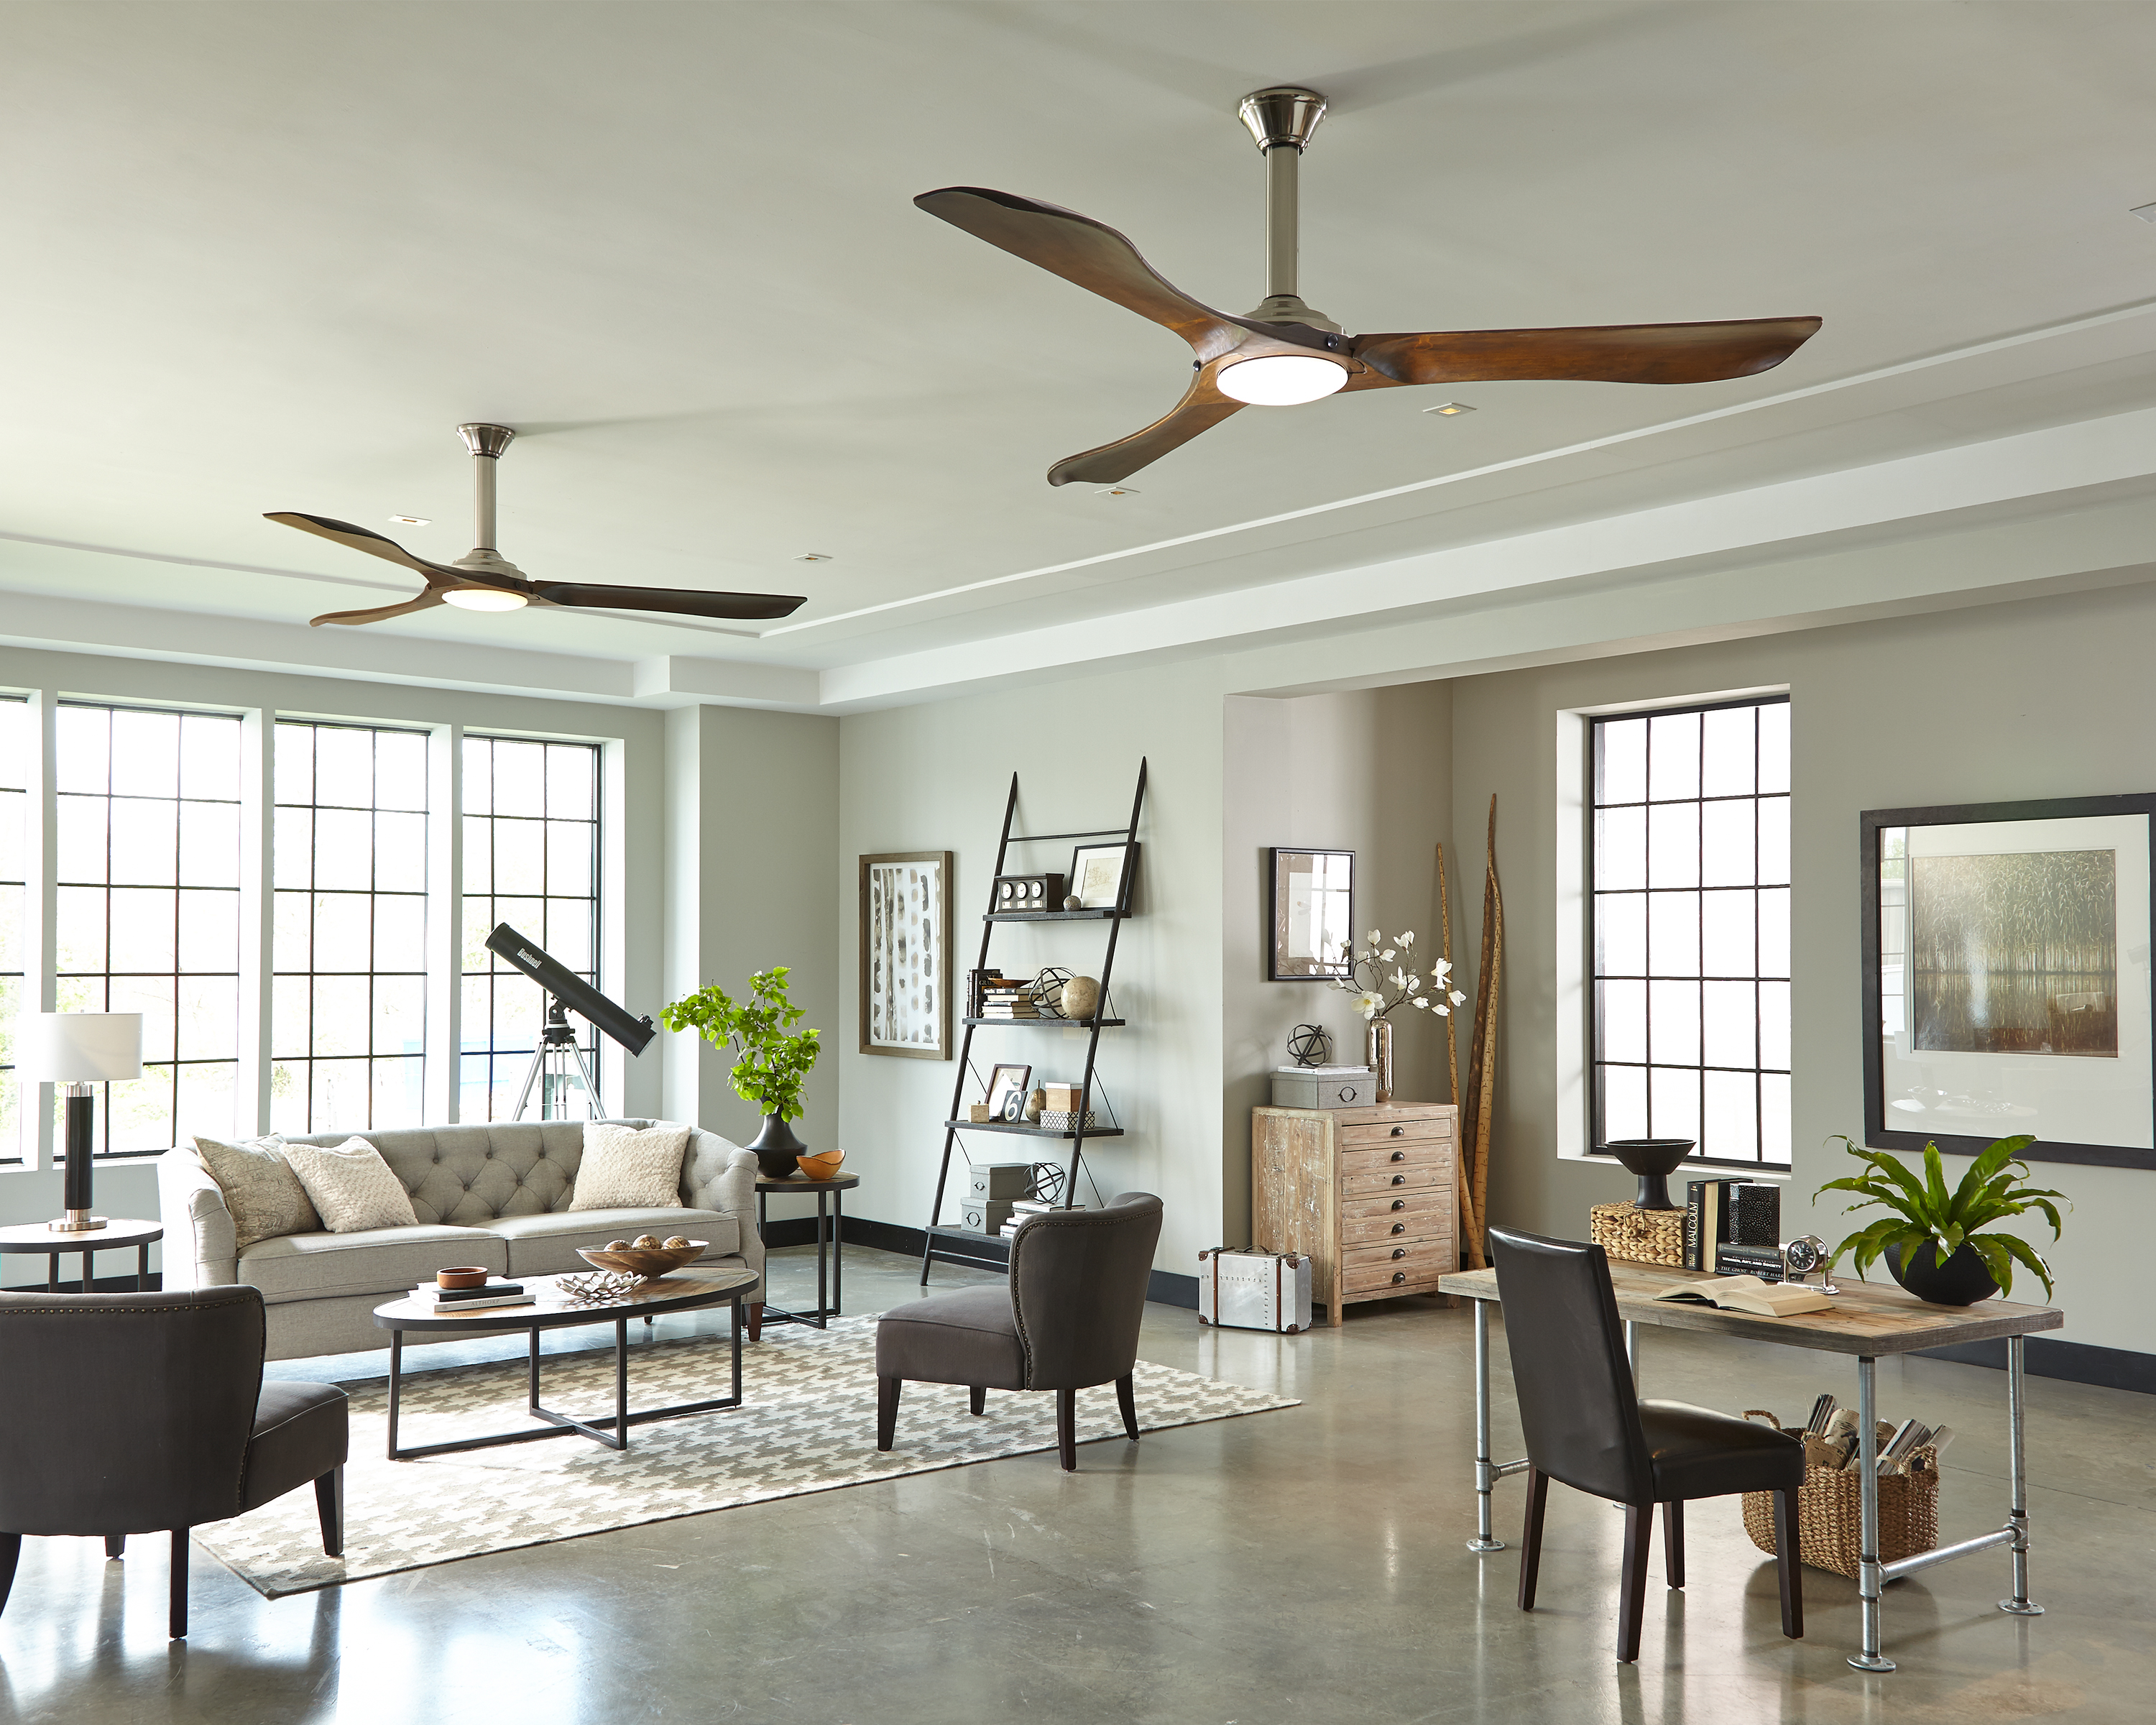 Minimalist Max Ceiling Fans in an open living room.